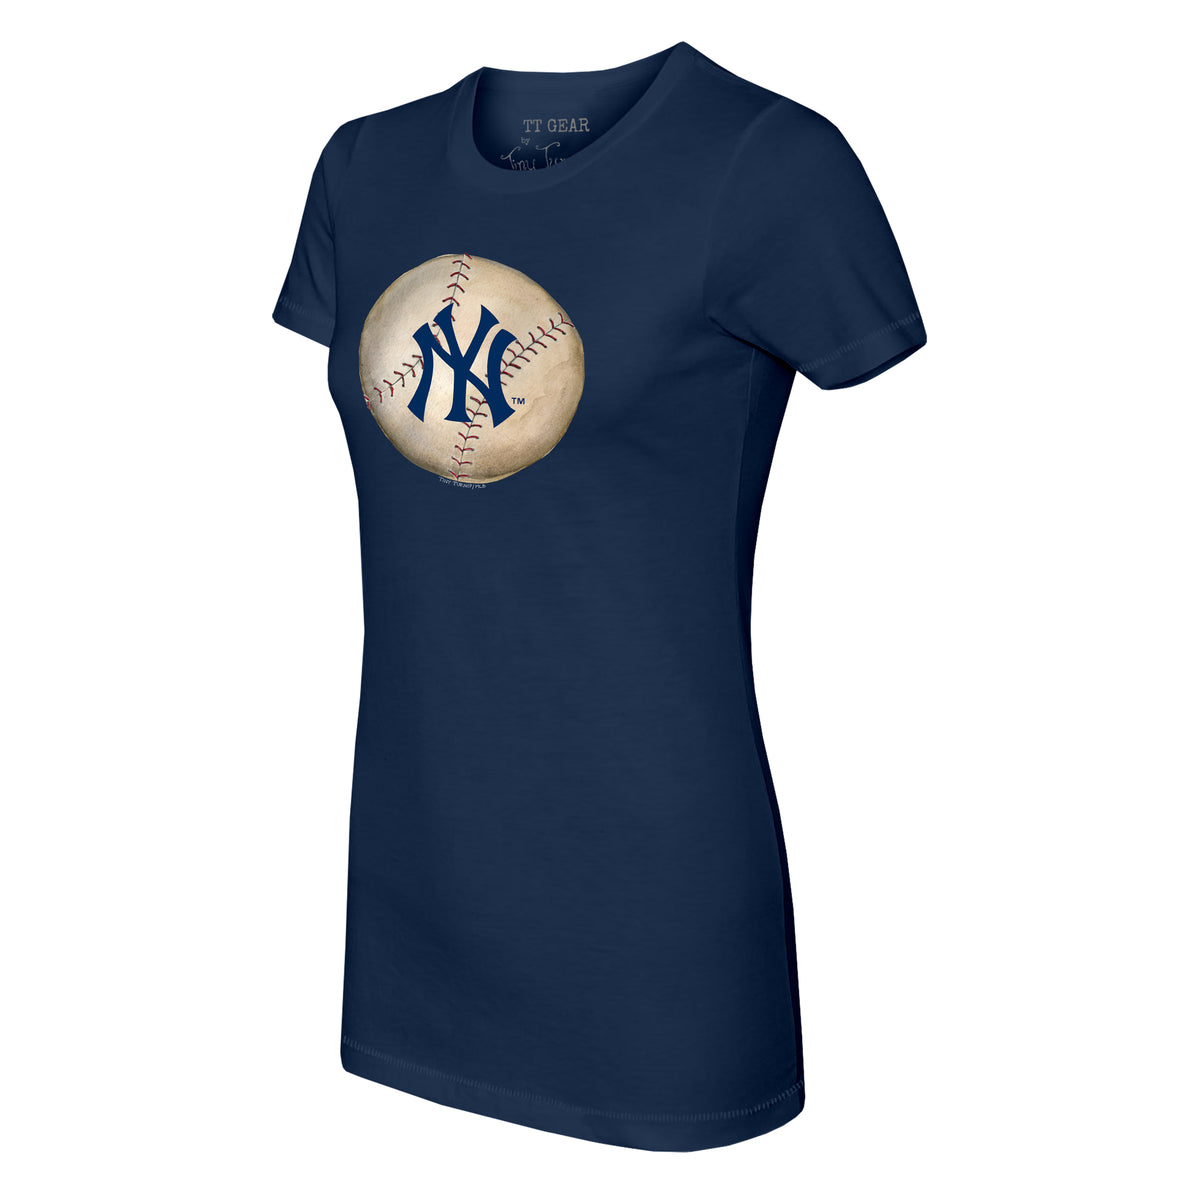 yankees stitched jersey